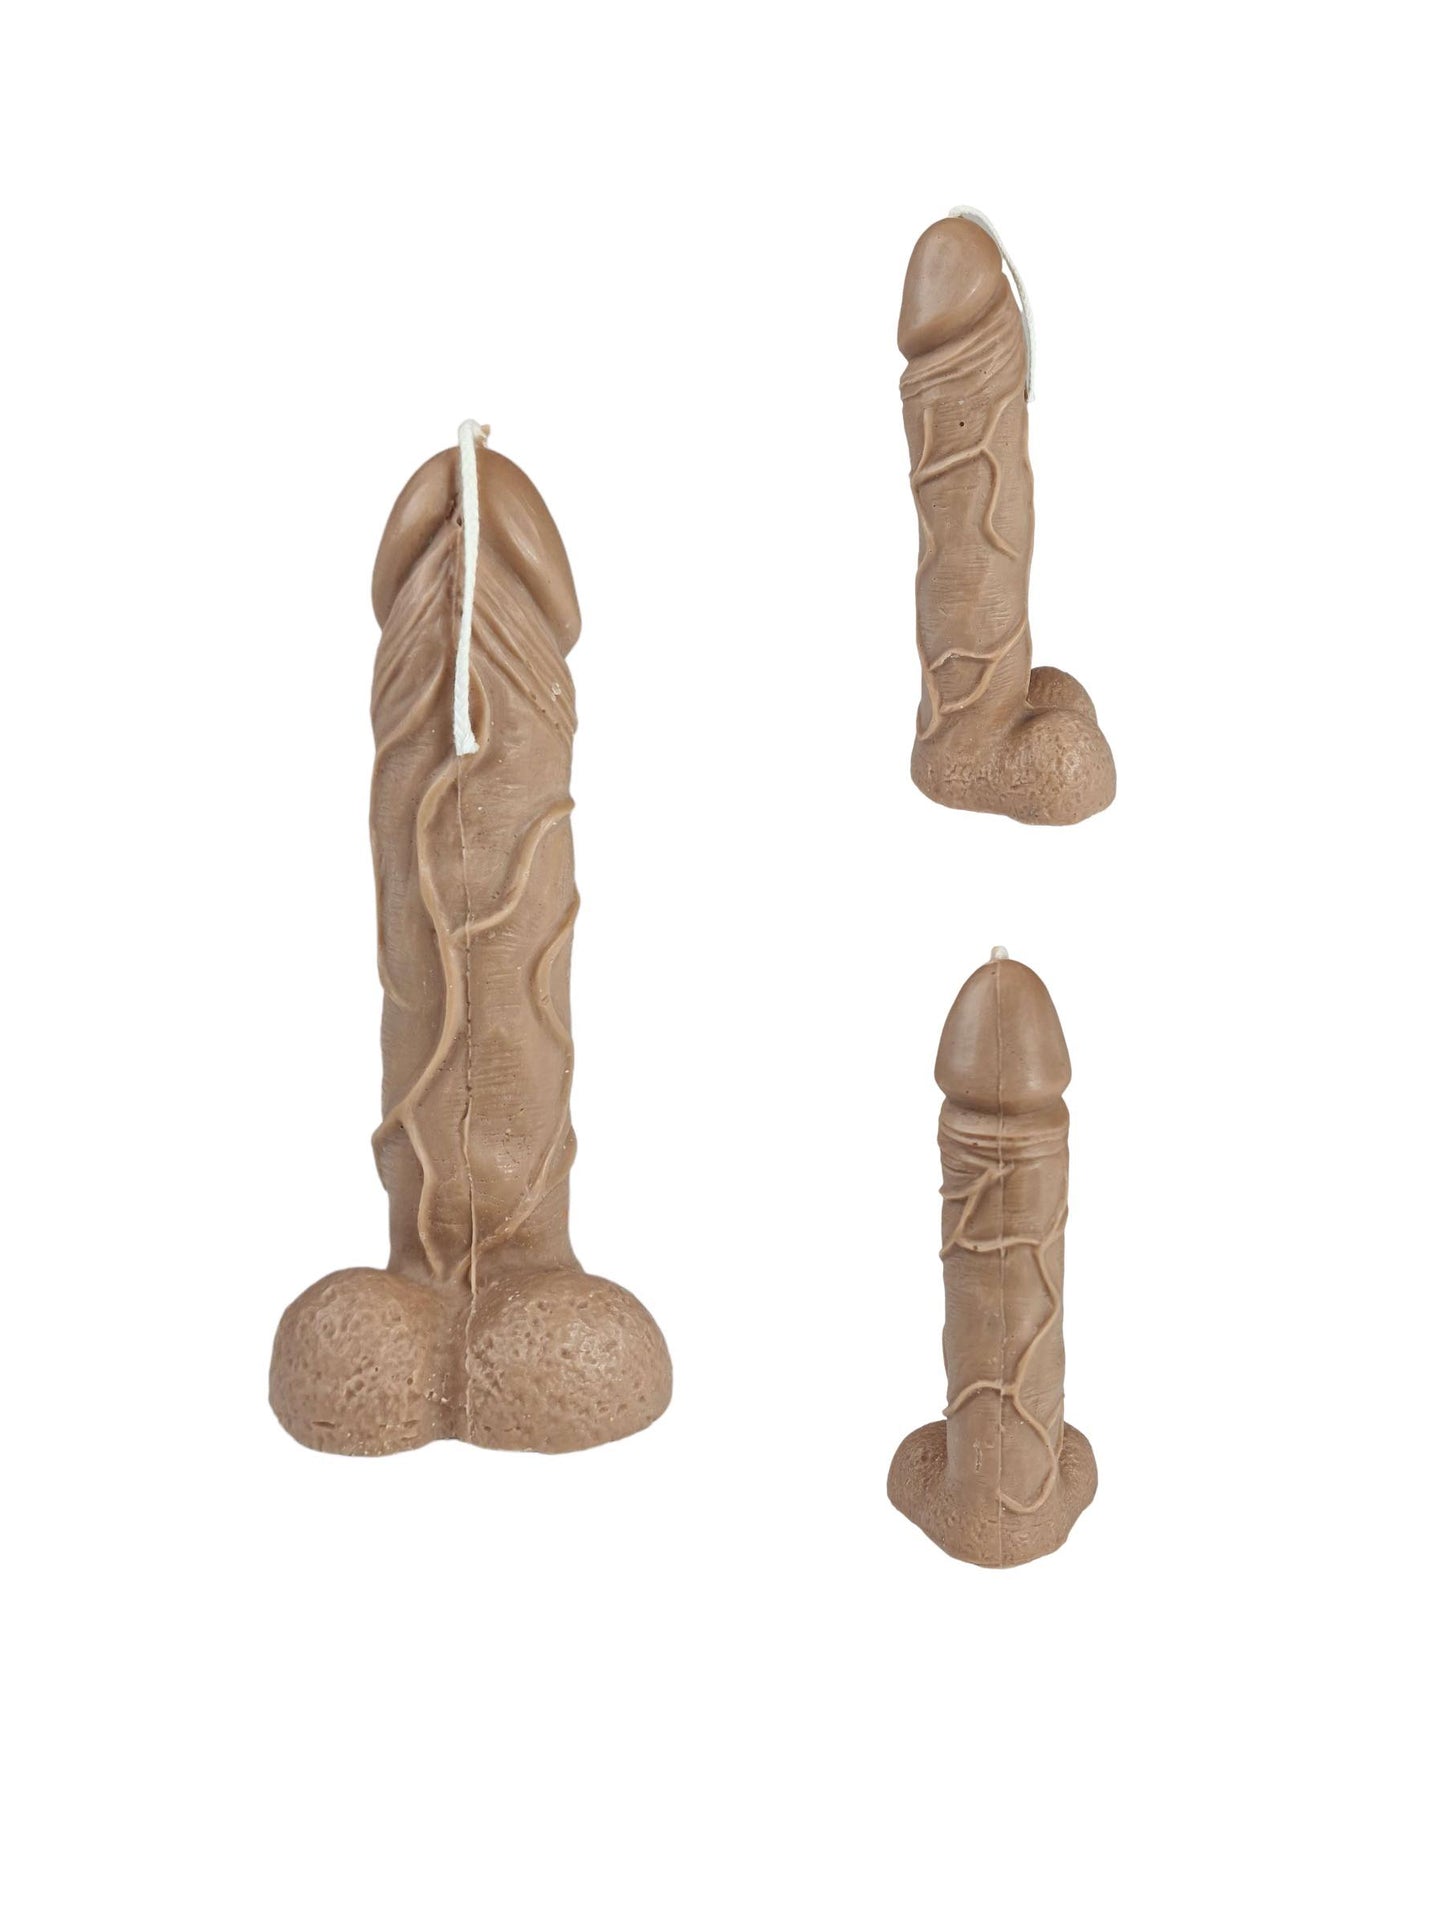 Different and fun light in the shape of a cock or penis